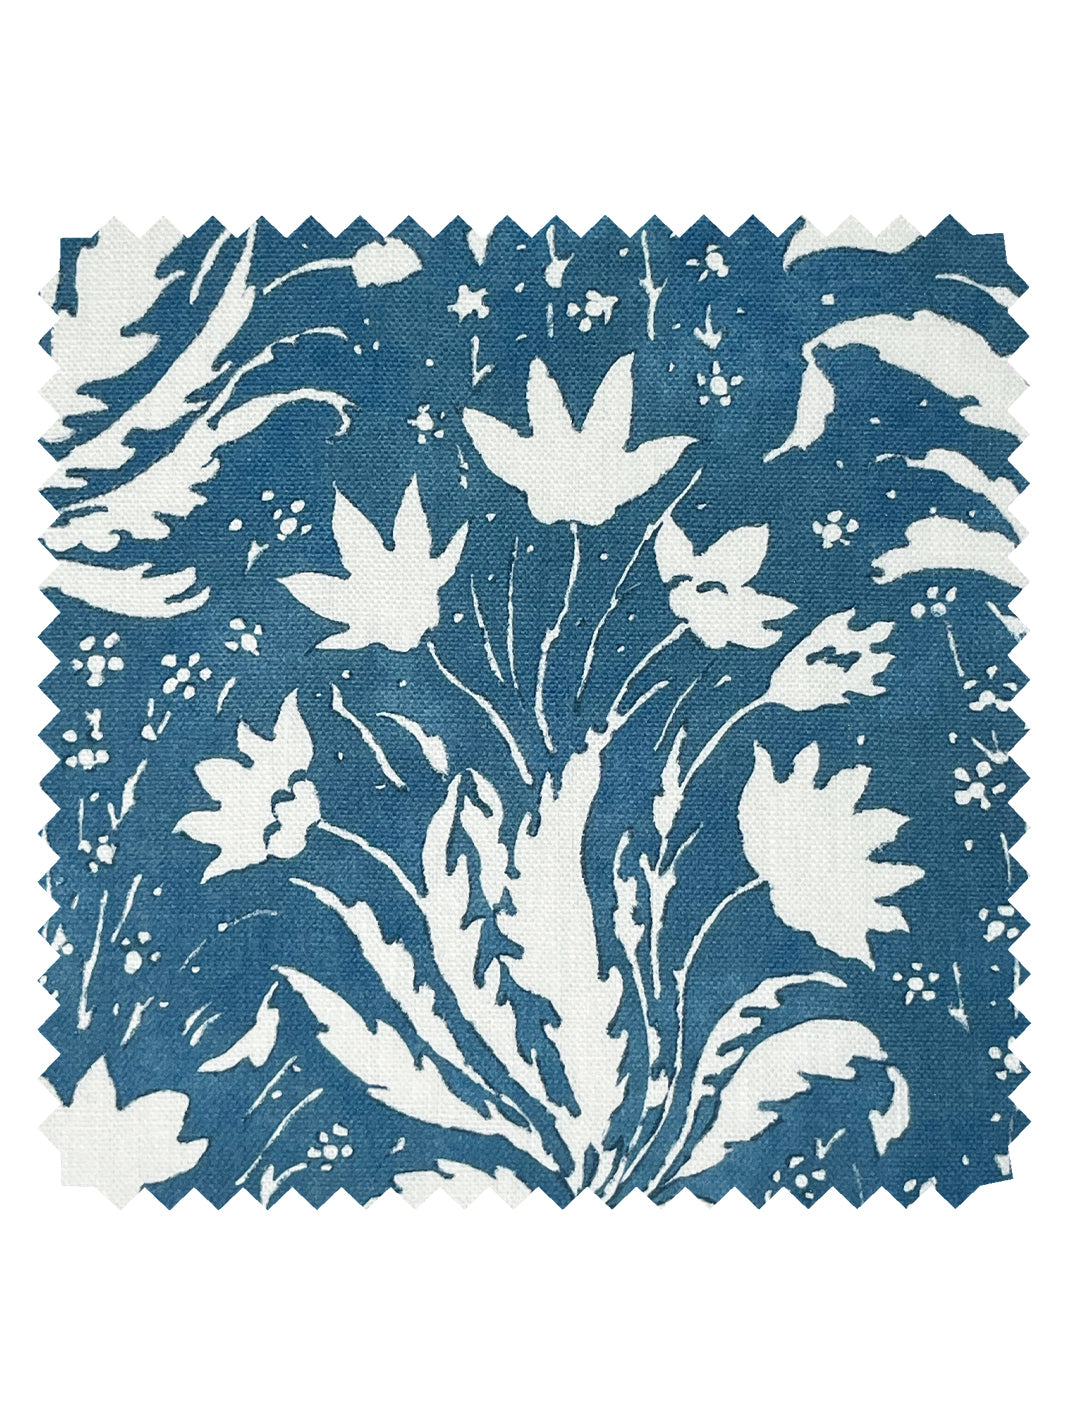 'Hillhouse Floral One Color' Linen Fabric by Nathan Turner - Dark Blue